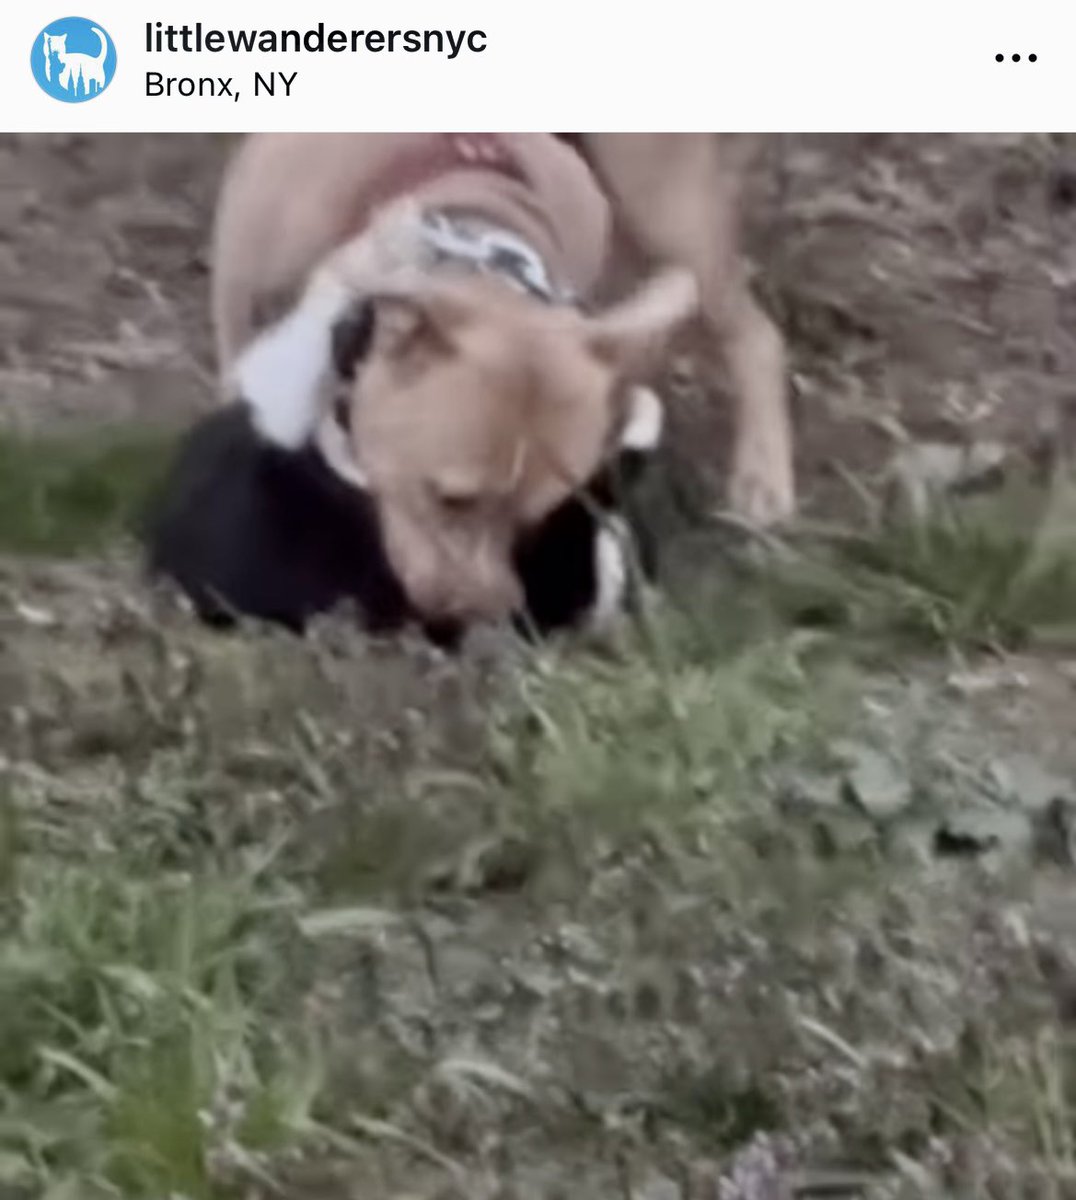 🐾 You guys all know I love cats and have fostered many strays, so this one hit me really hard. The picture below comes from an absolutely horrifying video of a dog tearing apart a stray cat while a man in the background encourages the dog to keep going. The whole video was too…